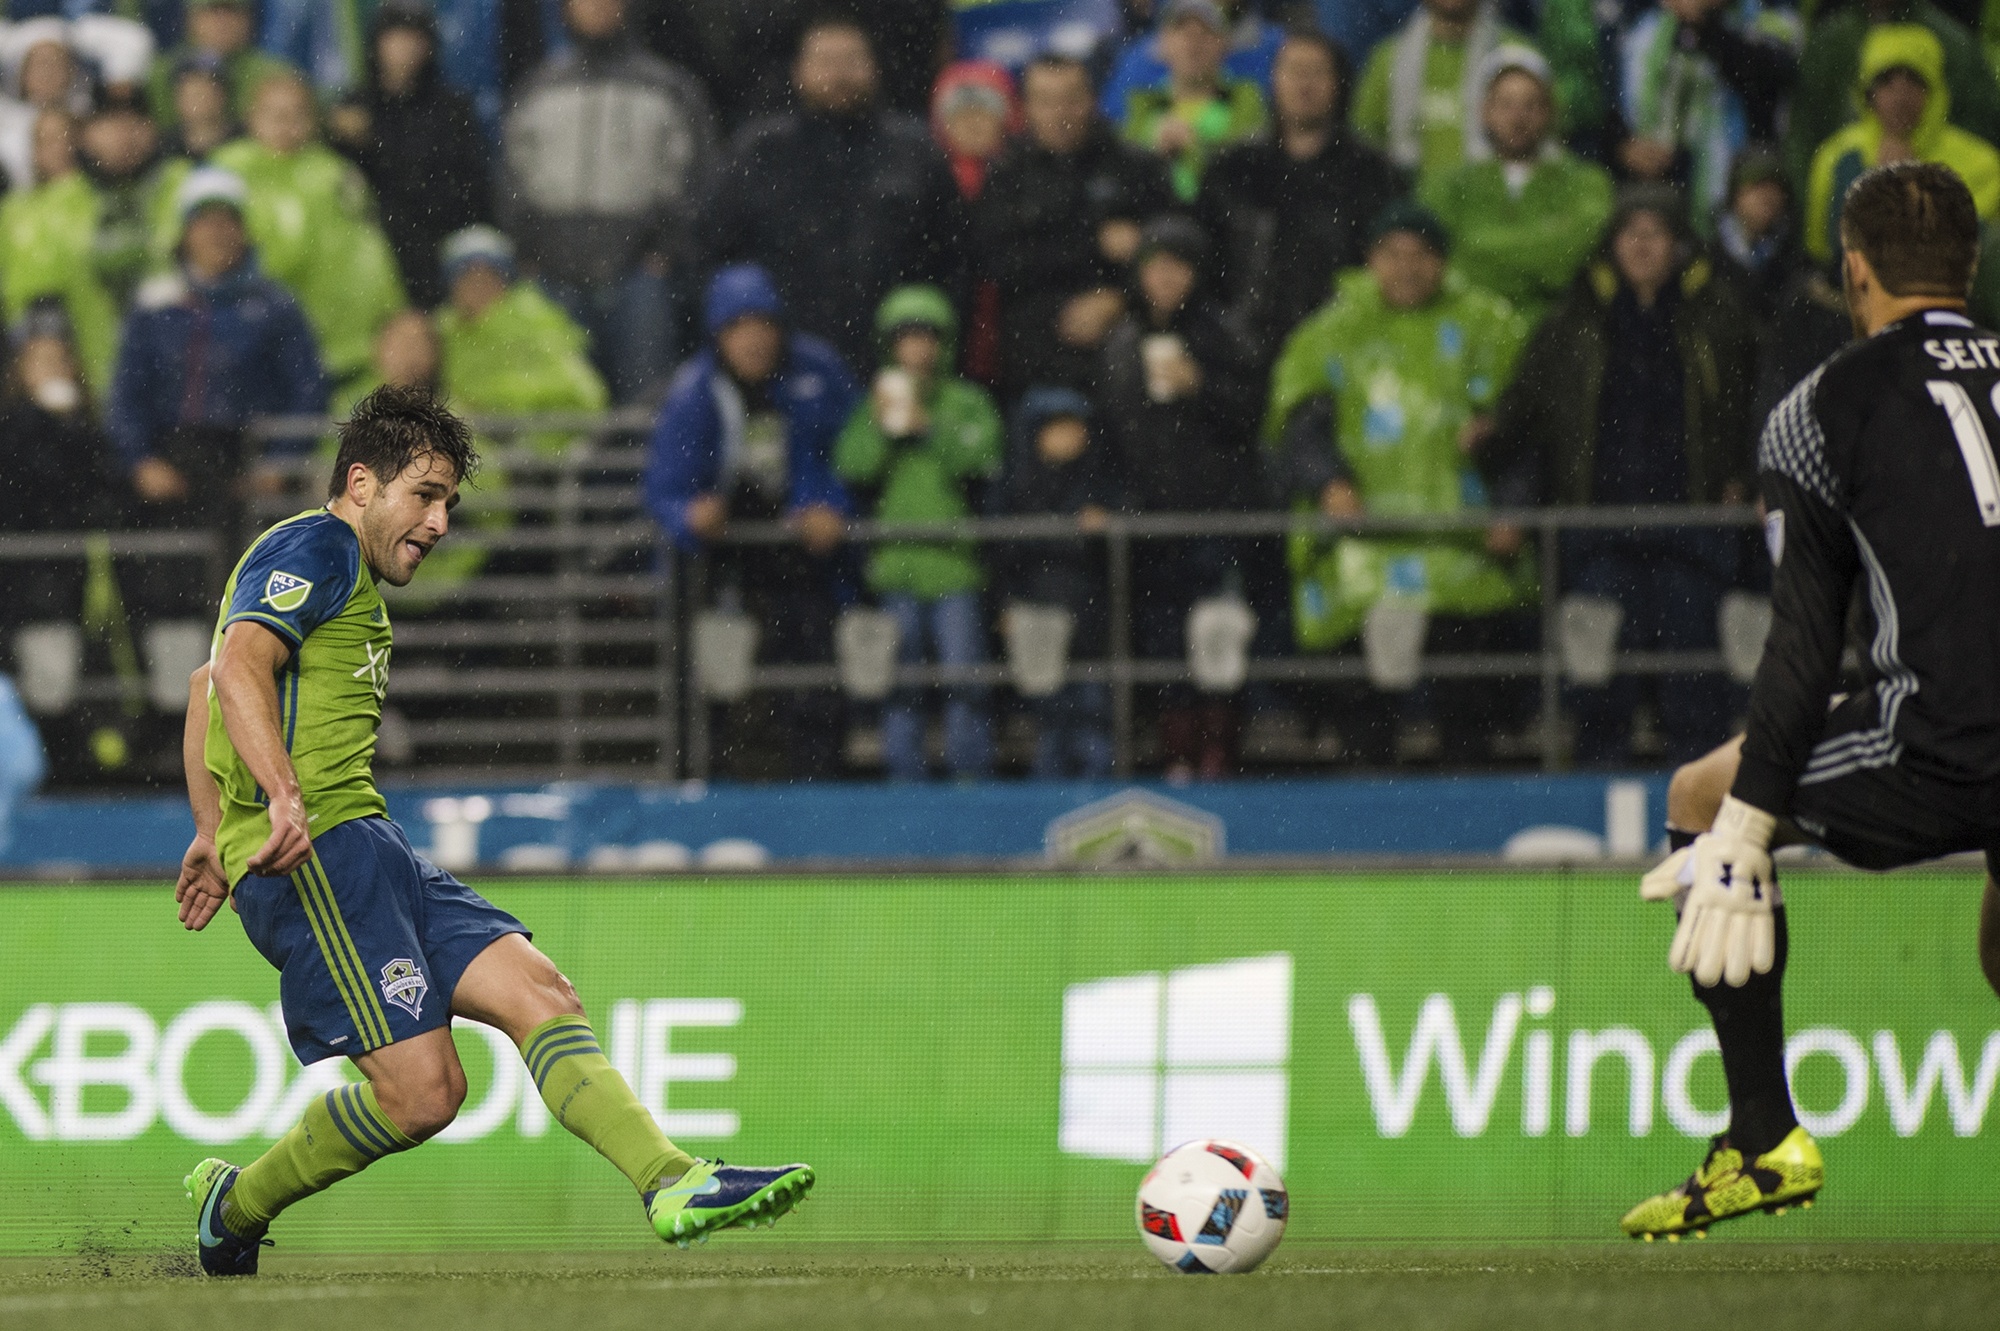 Sounders take 3-0 lead over FC Dallas as coach Brian Schmetzer makes all the right moves in first leg